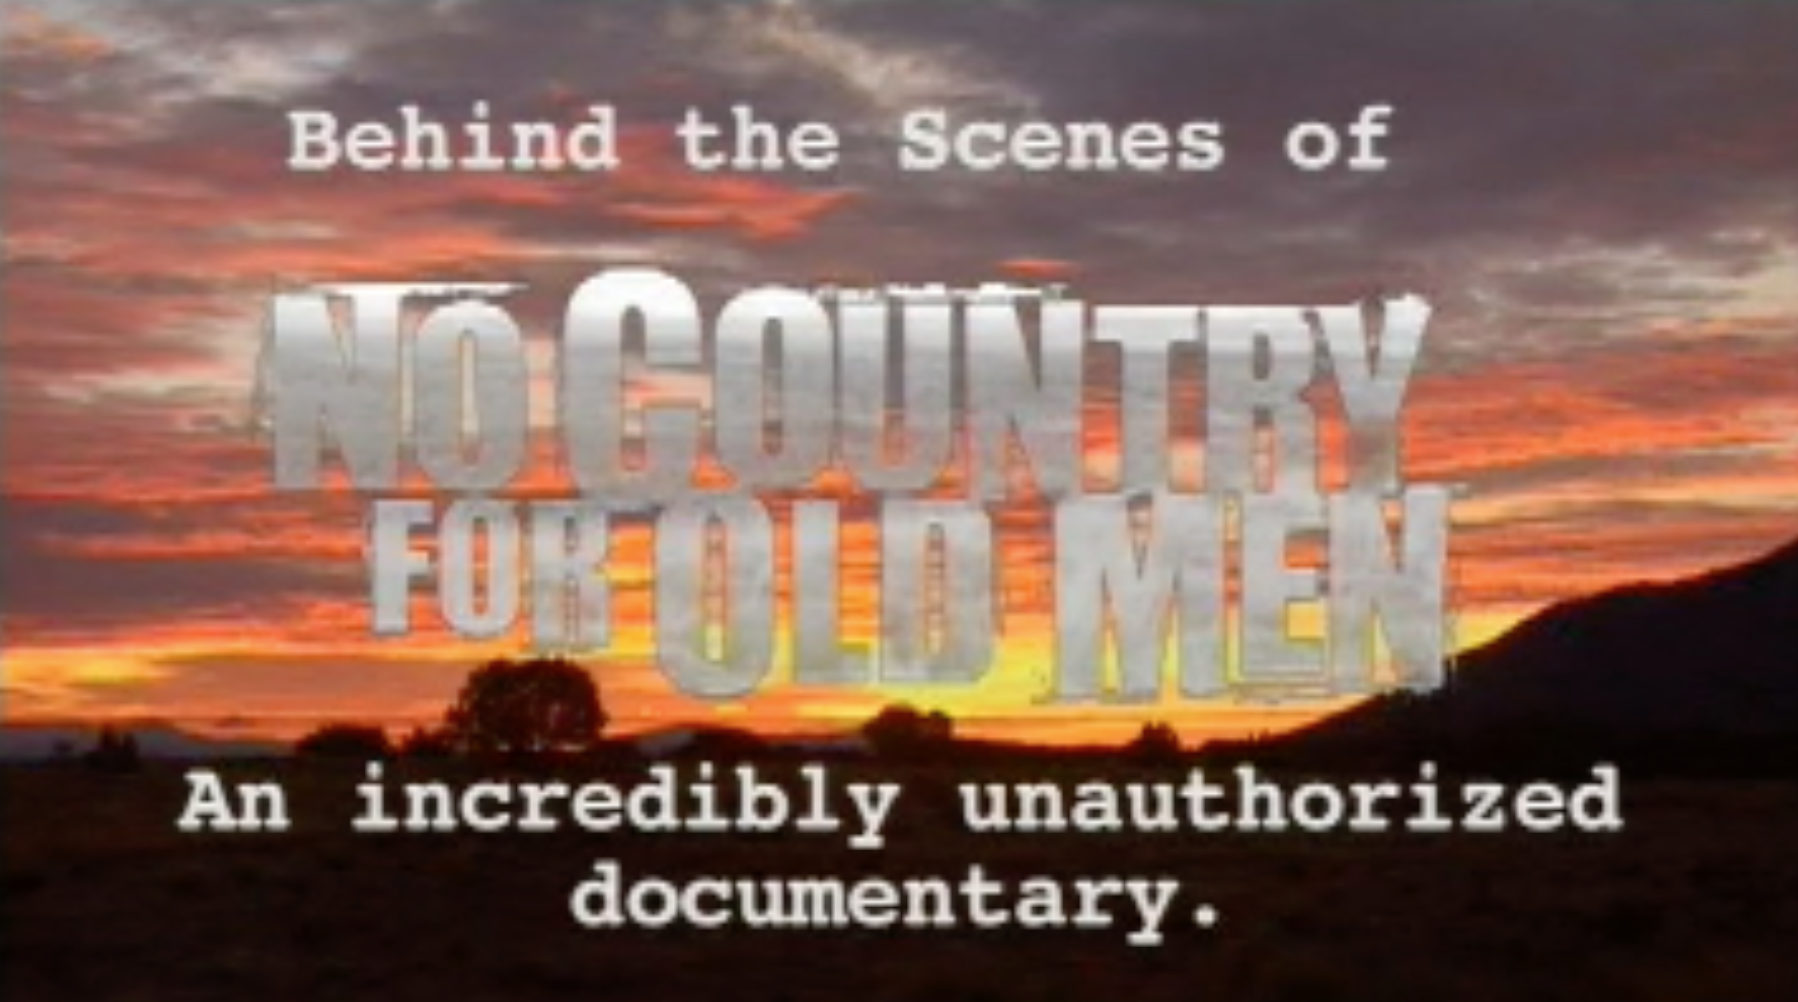 COMEDY: Josh Brolin's Behind the Scenes of "No Country For Old Men": A Completely Unauthorized Documentary